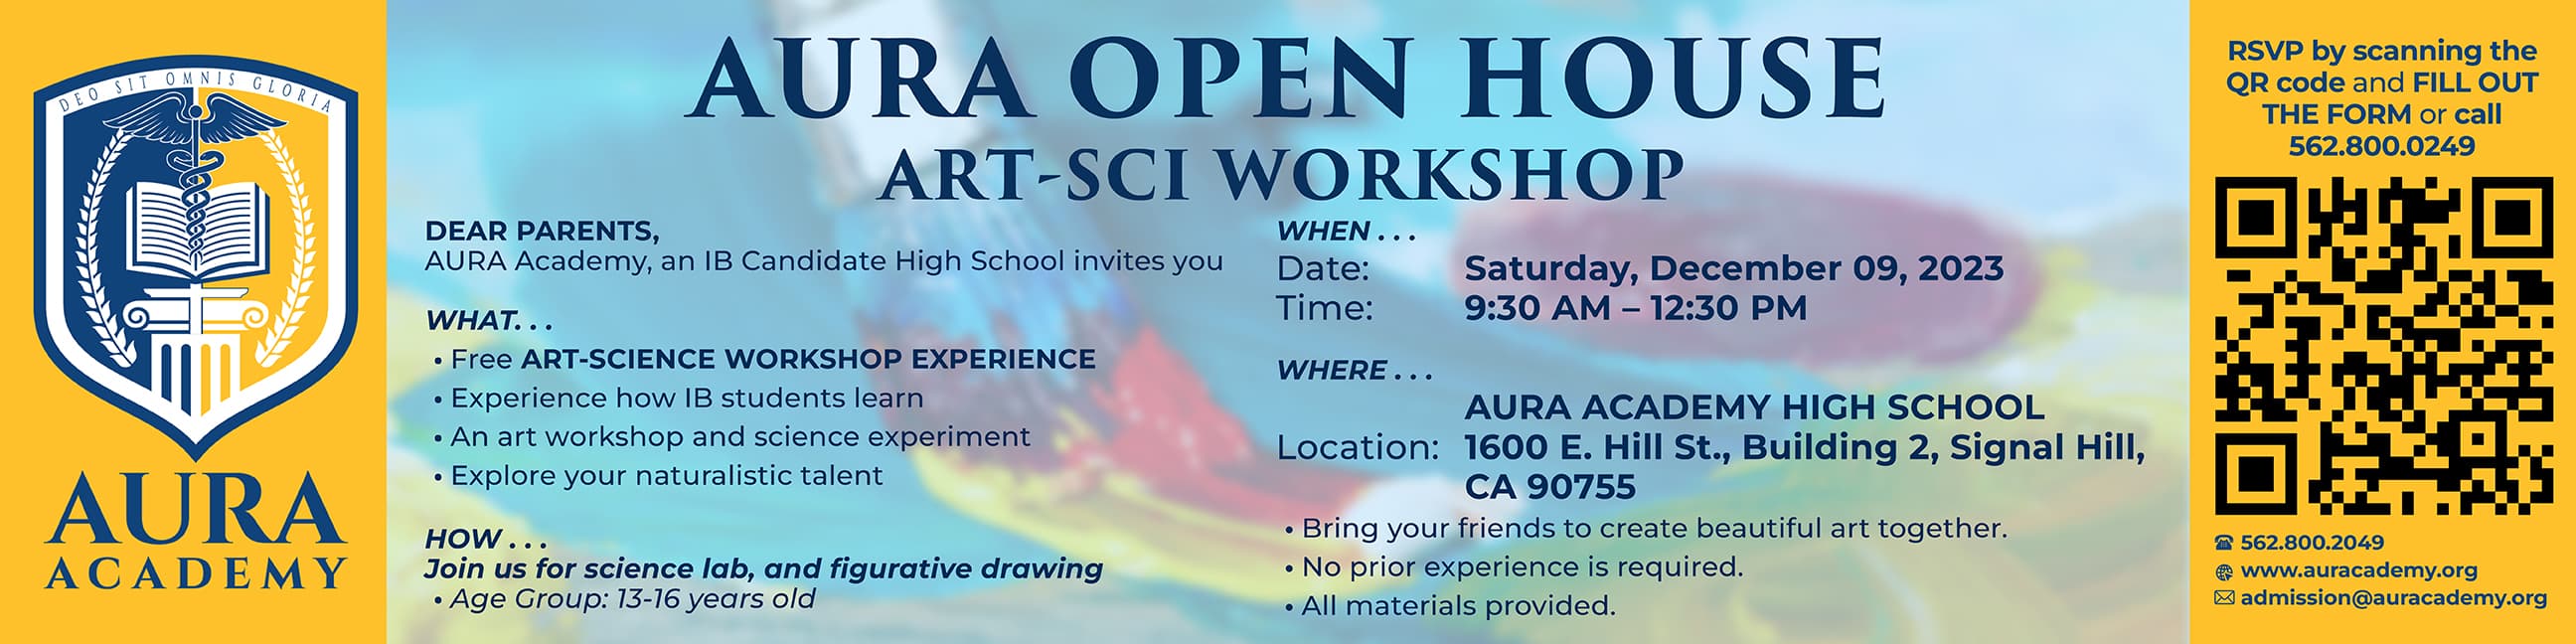 AURA Open House APPROVED BY MS KIM NOV 8